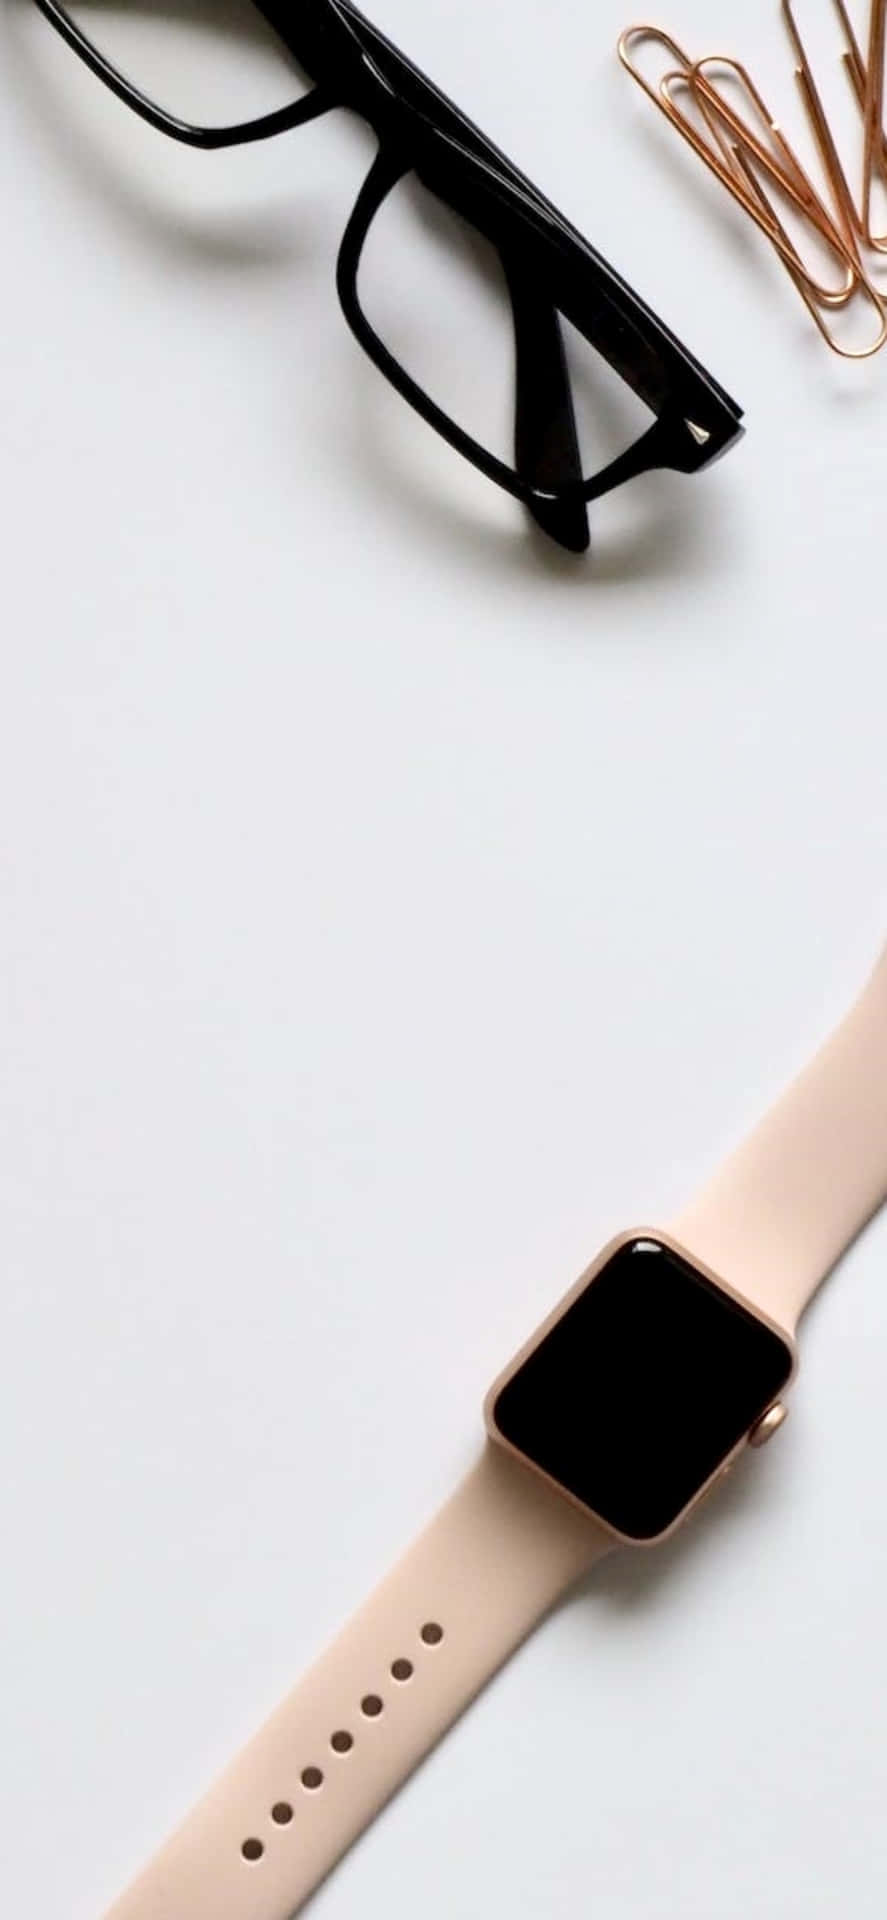 Iphone X Desk Background Eyeglasses And an iWatch